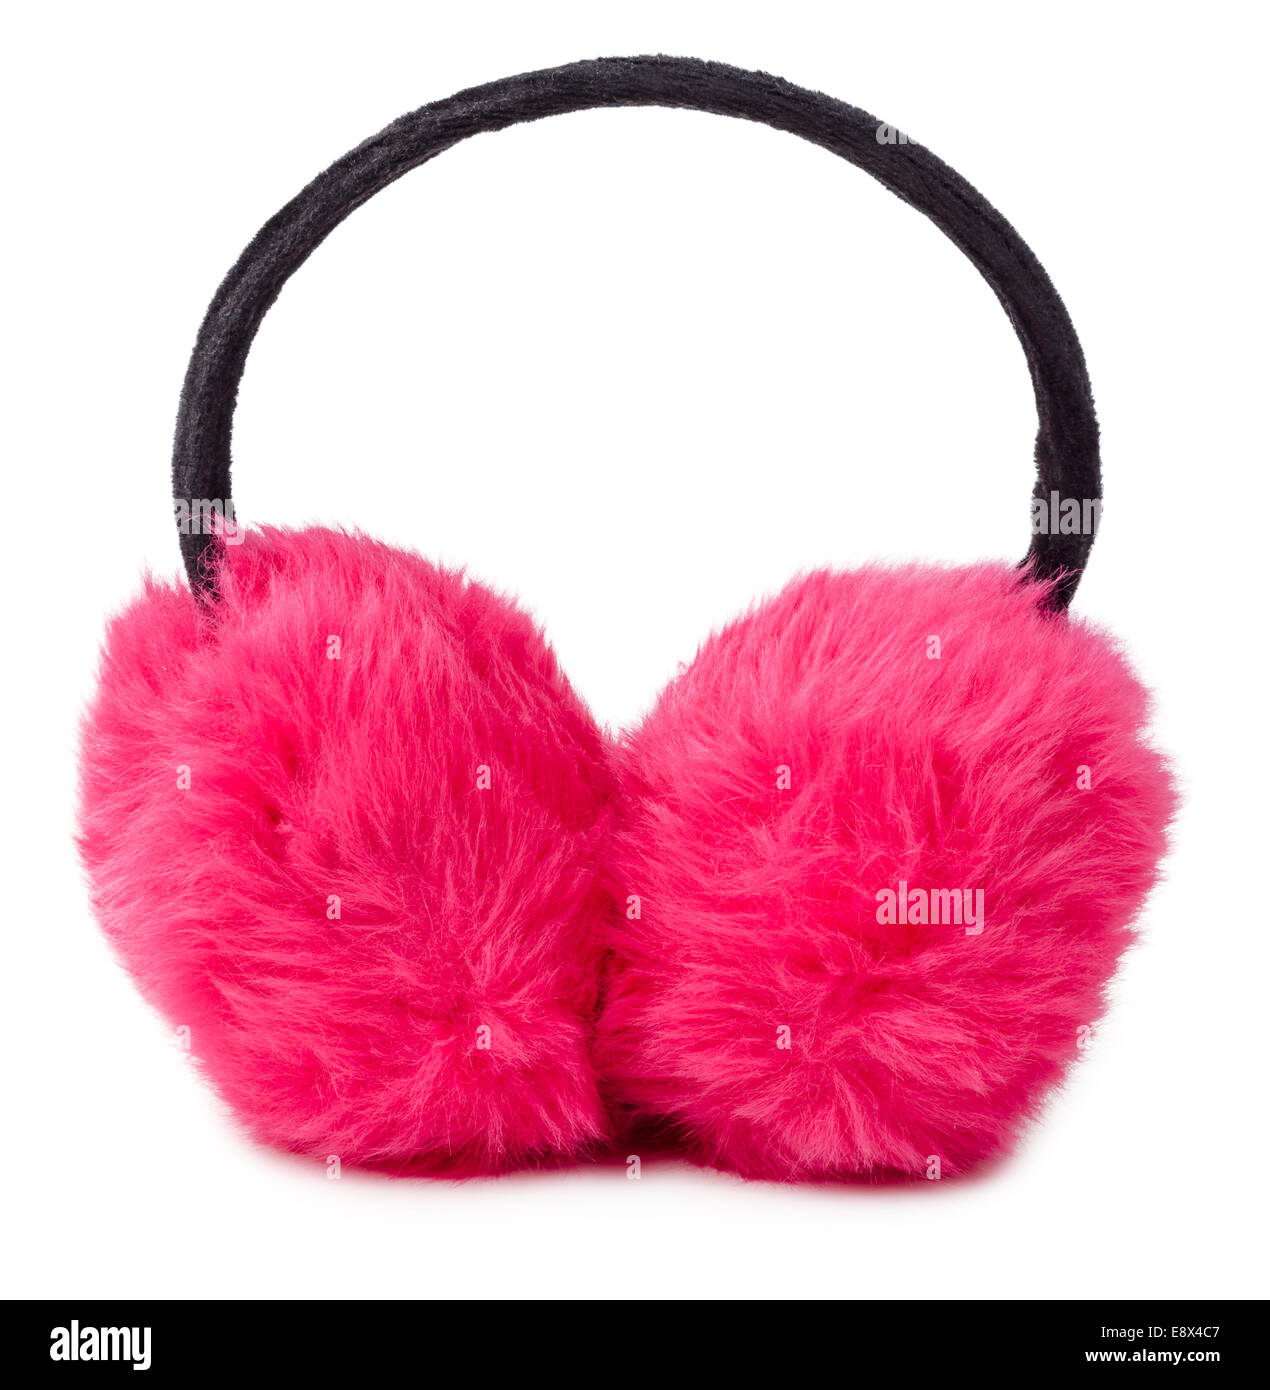 Pink Winter Earmuffs Isolated On White Background Stock Photo